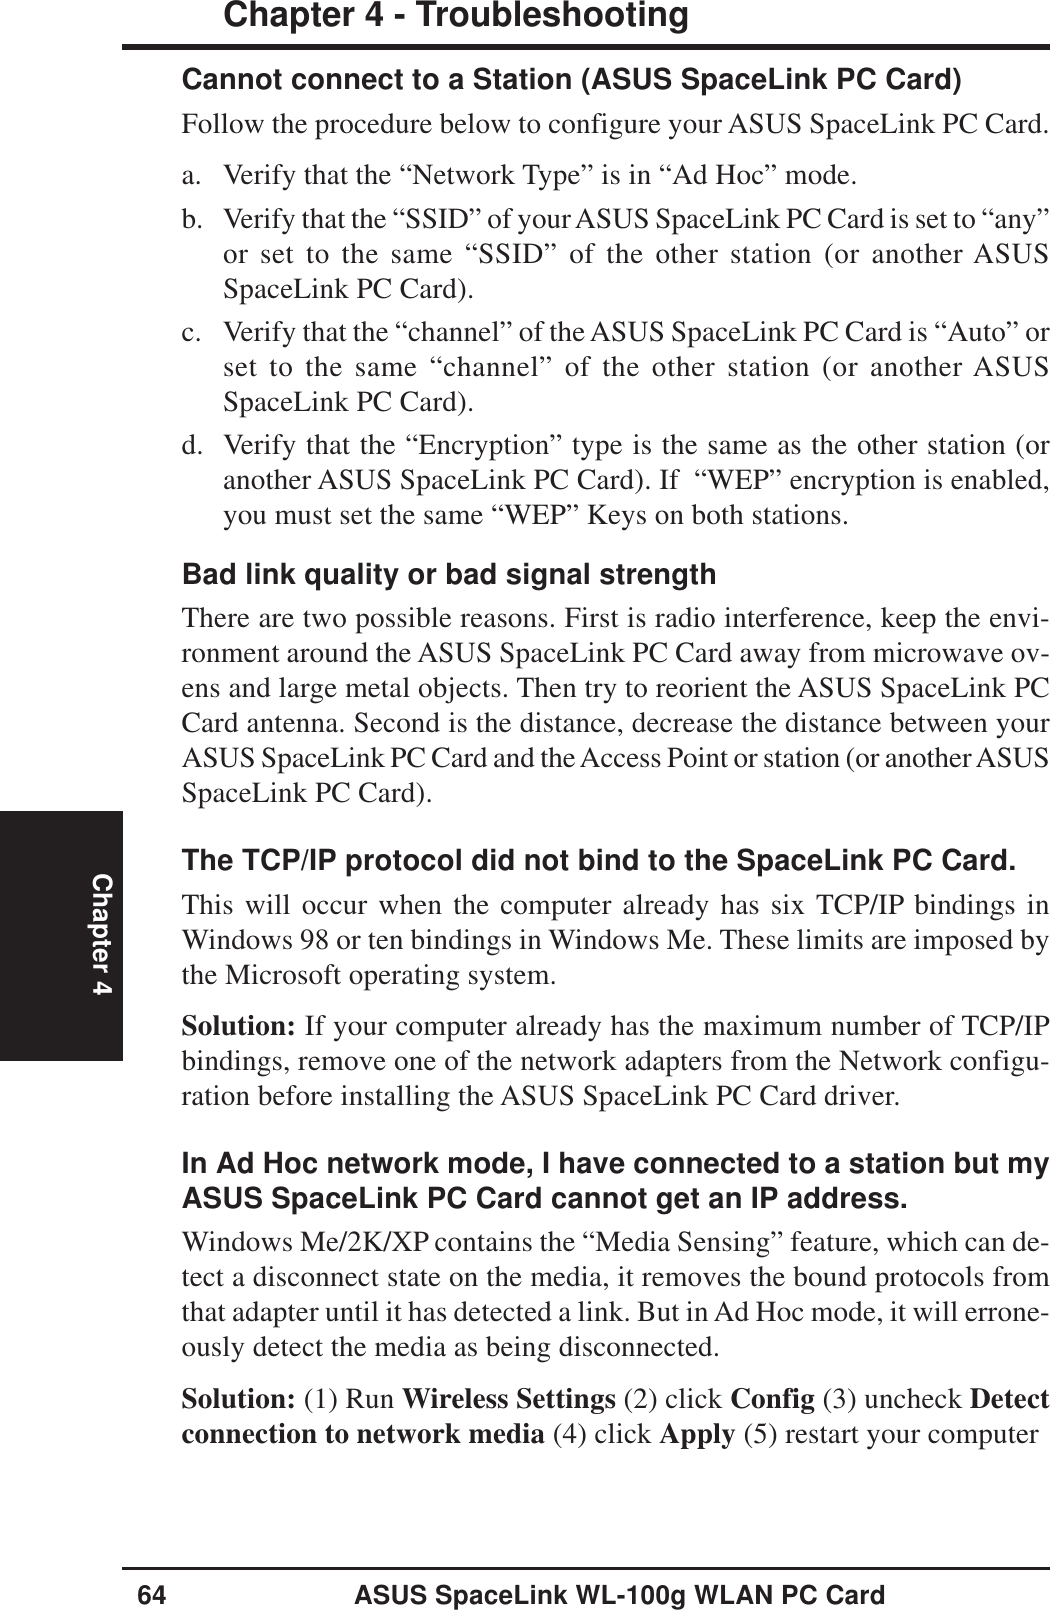 64 ASUS SpaceLink WL-100g WLAN PC CardChapter 4 - TroubleshootingChapter 4Cannot connect to a Station (ASUS SpaceLink PC Card)Follow the procedure below to configure your ASUS SpaceLink PC Card.a. Verify that the “Network Type” is in “Ad Hoc” mode.b. Verify that the “SSID” of your ASUS SpaceLink PC Card is set to “any”or set to the same “SSID” of the other station (or another ASUSSpaceLink PC Card).c. Verify that the “channel” of the ASUS SpaceLink PC Card is “Auto” orset to the same “channel” of the other station (or another ASUSSpaceLink PC Card).d. Verify that the “Encryption” type is the same as the other station (oranother ASUS SpaceLink PC Card). If  “WEP” encryption is enabled,you must set the same “WEP” Keys on both stations.Bad link quality or bad signal strengthThere are two possible reasons. First is radio interference, keep the envi-ronment around the ASUS SpaceLink PC Card away from microwave ov-ens and large metal objects. Then try to reorient the ASUS SpaceLink PCCard antenna. Second is the distance, decrease the distance between yourASUS SpaceLink PC Card and the Access Point or station (or another ASUSSpaceLink PC Card).The TCP/IP protocol did not bind to the SpaceLink PC Card.This will occur when the computer already has six TCP/IP bindings inWindows 98 or ten bindings in Windows Me. These limits are imposed bythe Microsoft operating system.Solution: If your computer already has the maximum number of TCP/IPbindings, remove one of the network adapters from the Network configu-ration before installing the ASUS SpaceLink PC Card driver.In Ad Hoc network mode, I have connected to a station but myASUS SpaceLink PC Card cannot get an IP address.Windows Me/2K/XP contains the “Media Sensing” feature, which can de-tect a disconnect state on the media, it removes the bound protocols fromthat adapter until it has detected a link. But in Ad Hoc mode, it will errone-ously detect the media as being disconnected.Solution: (1) Run Wireless Settings (2) click Config (3) uncheck Detectconnection to network media (4) click Apply (5) restart your computer